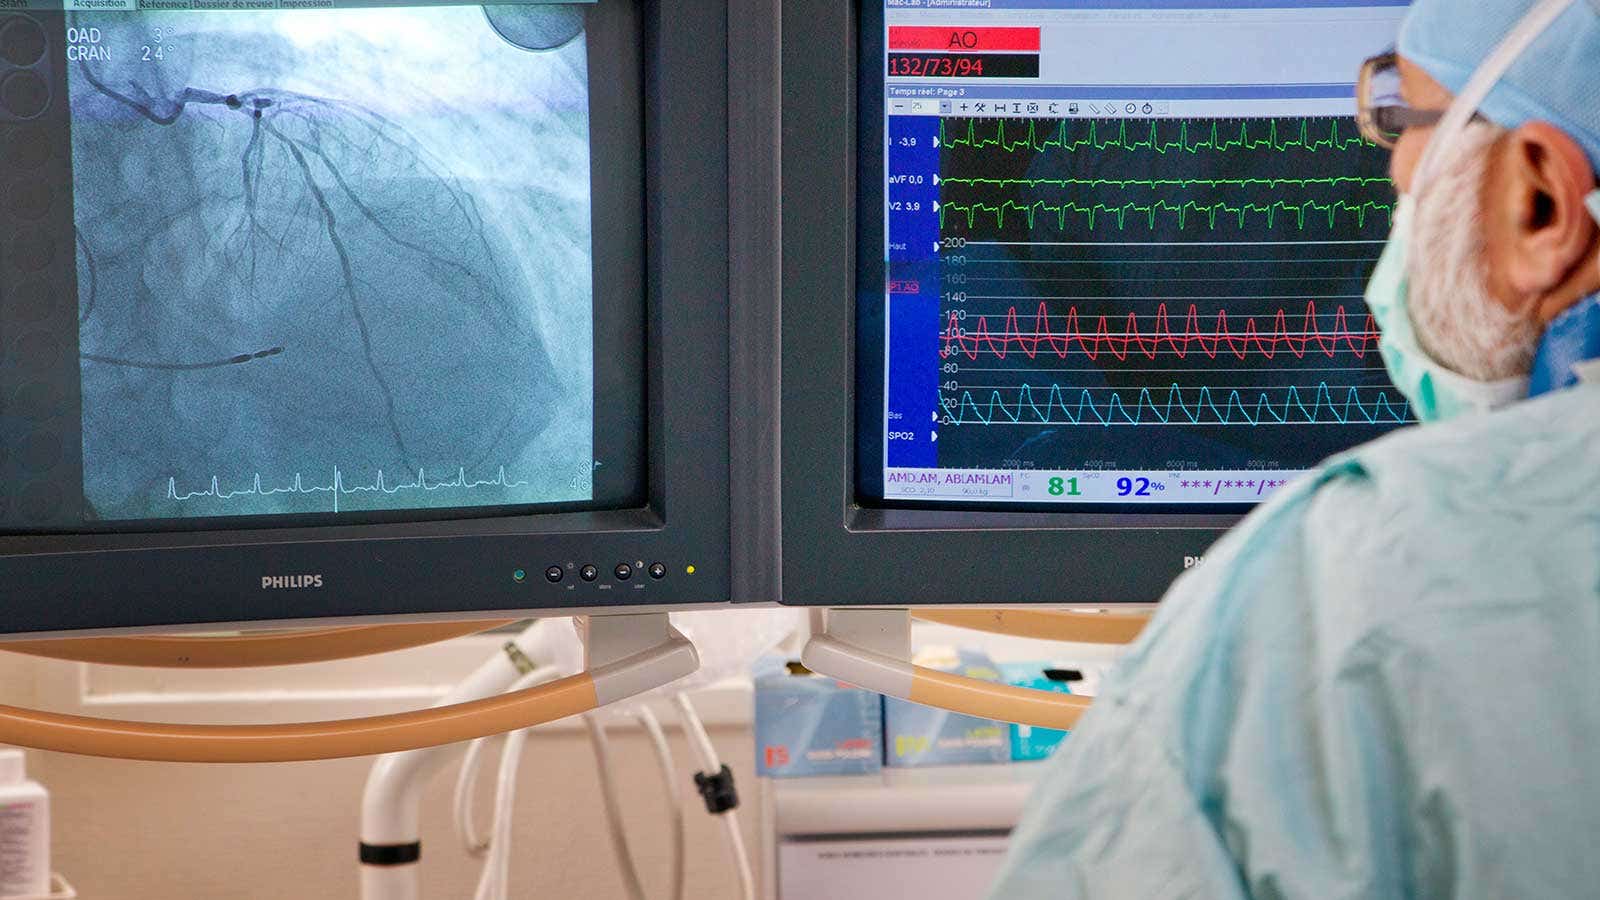 Culprit Lesion PCI Sooner than Diagnostic Angiography for Faster STEMI Reperfusion